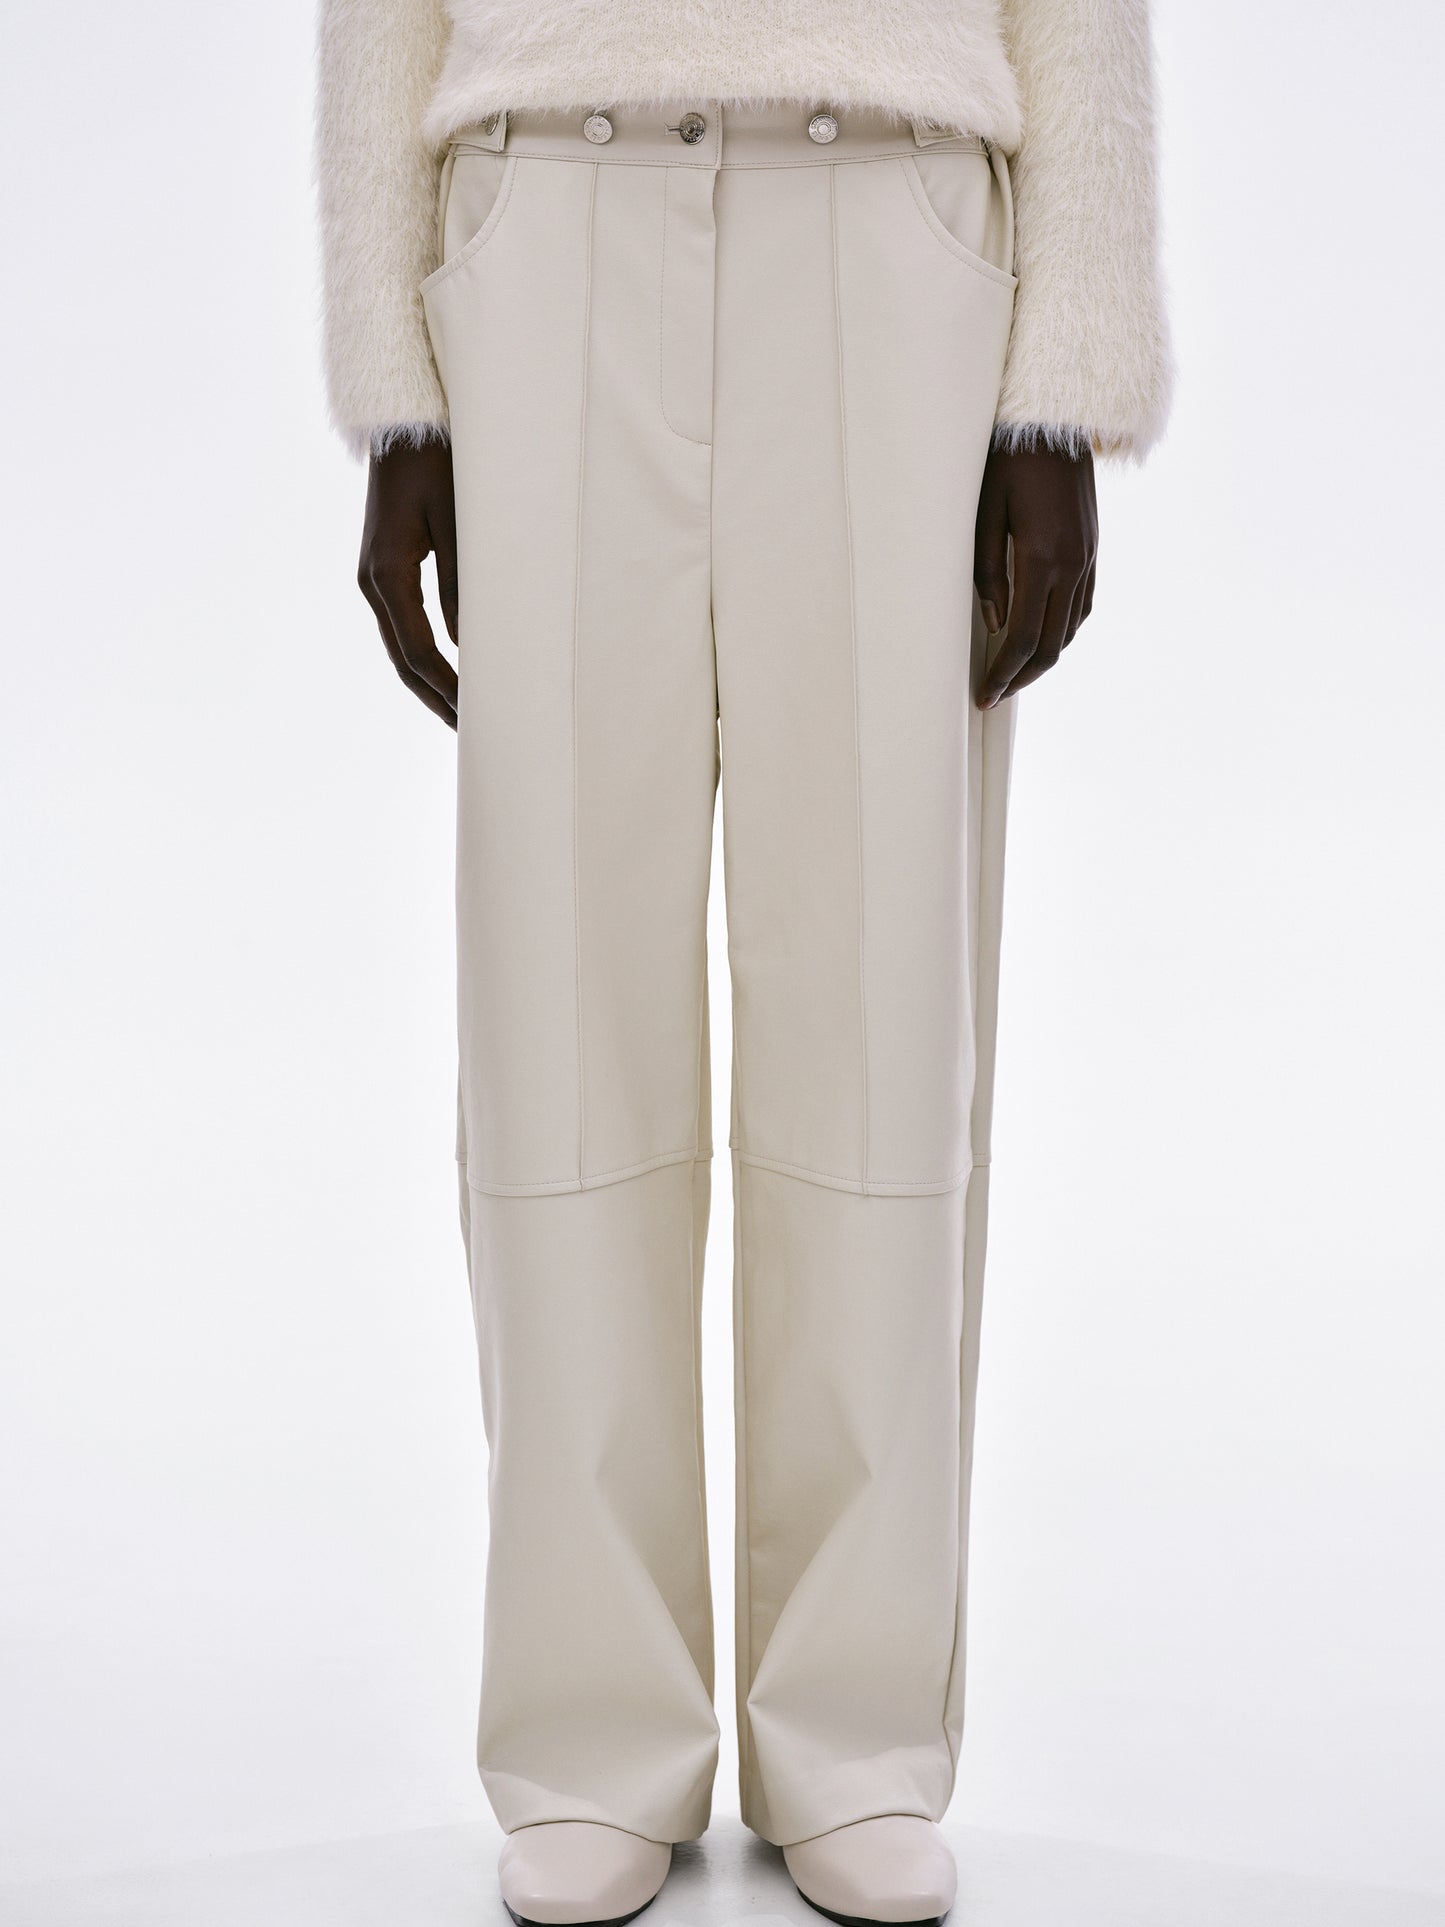 Buttoned Faux Leather Pants, Cream